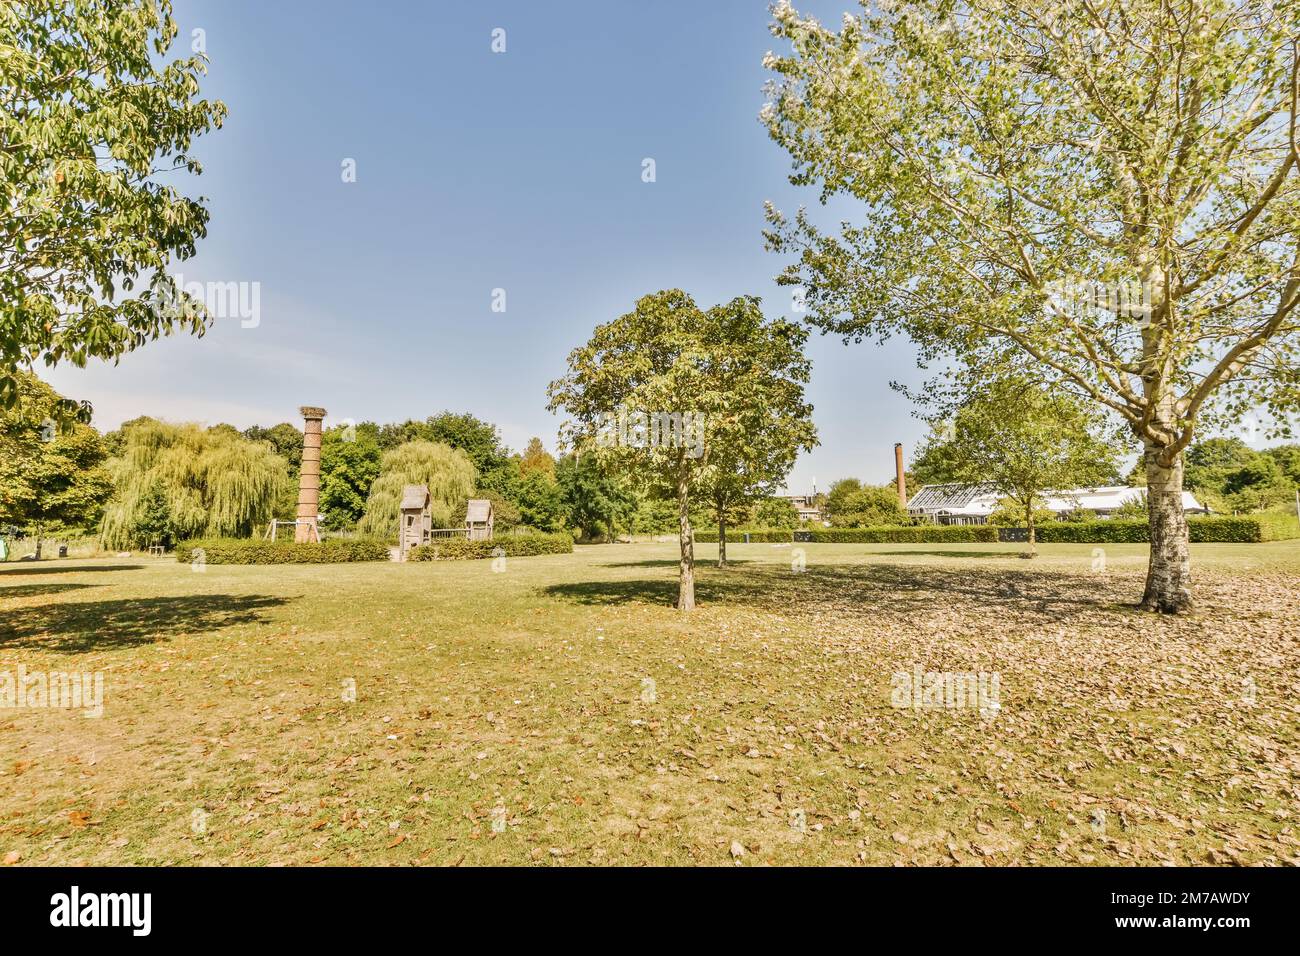 a park with trees, grass and some leaves in the fore - image was taken from an angleer's perspective Stock Photo